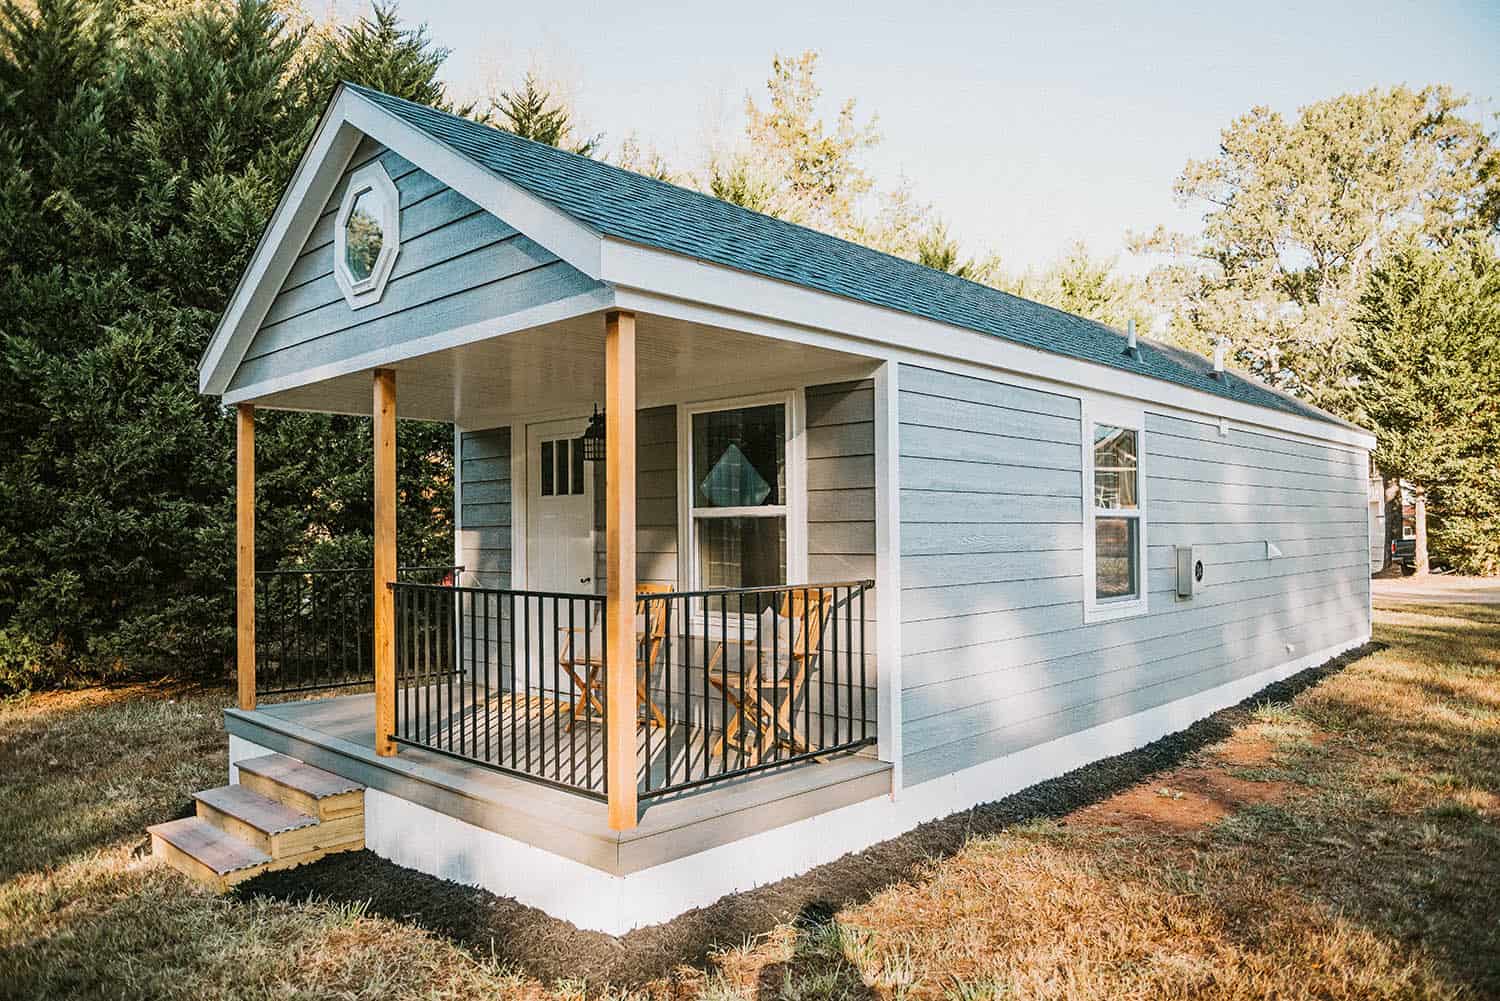 https://www.westwoodcabins.com/wp-content/uploads/2022/08/br-modular-tiny-cabin-home.jpg